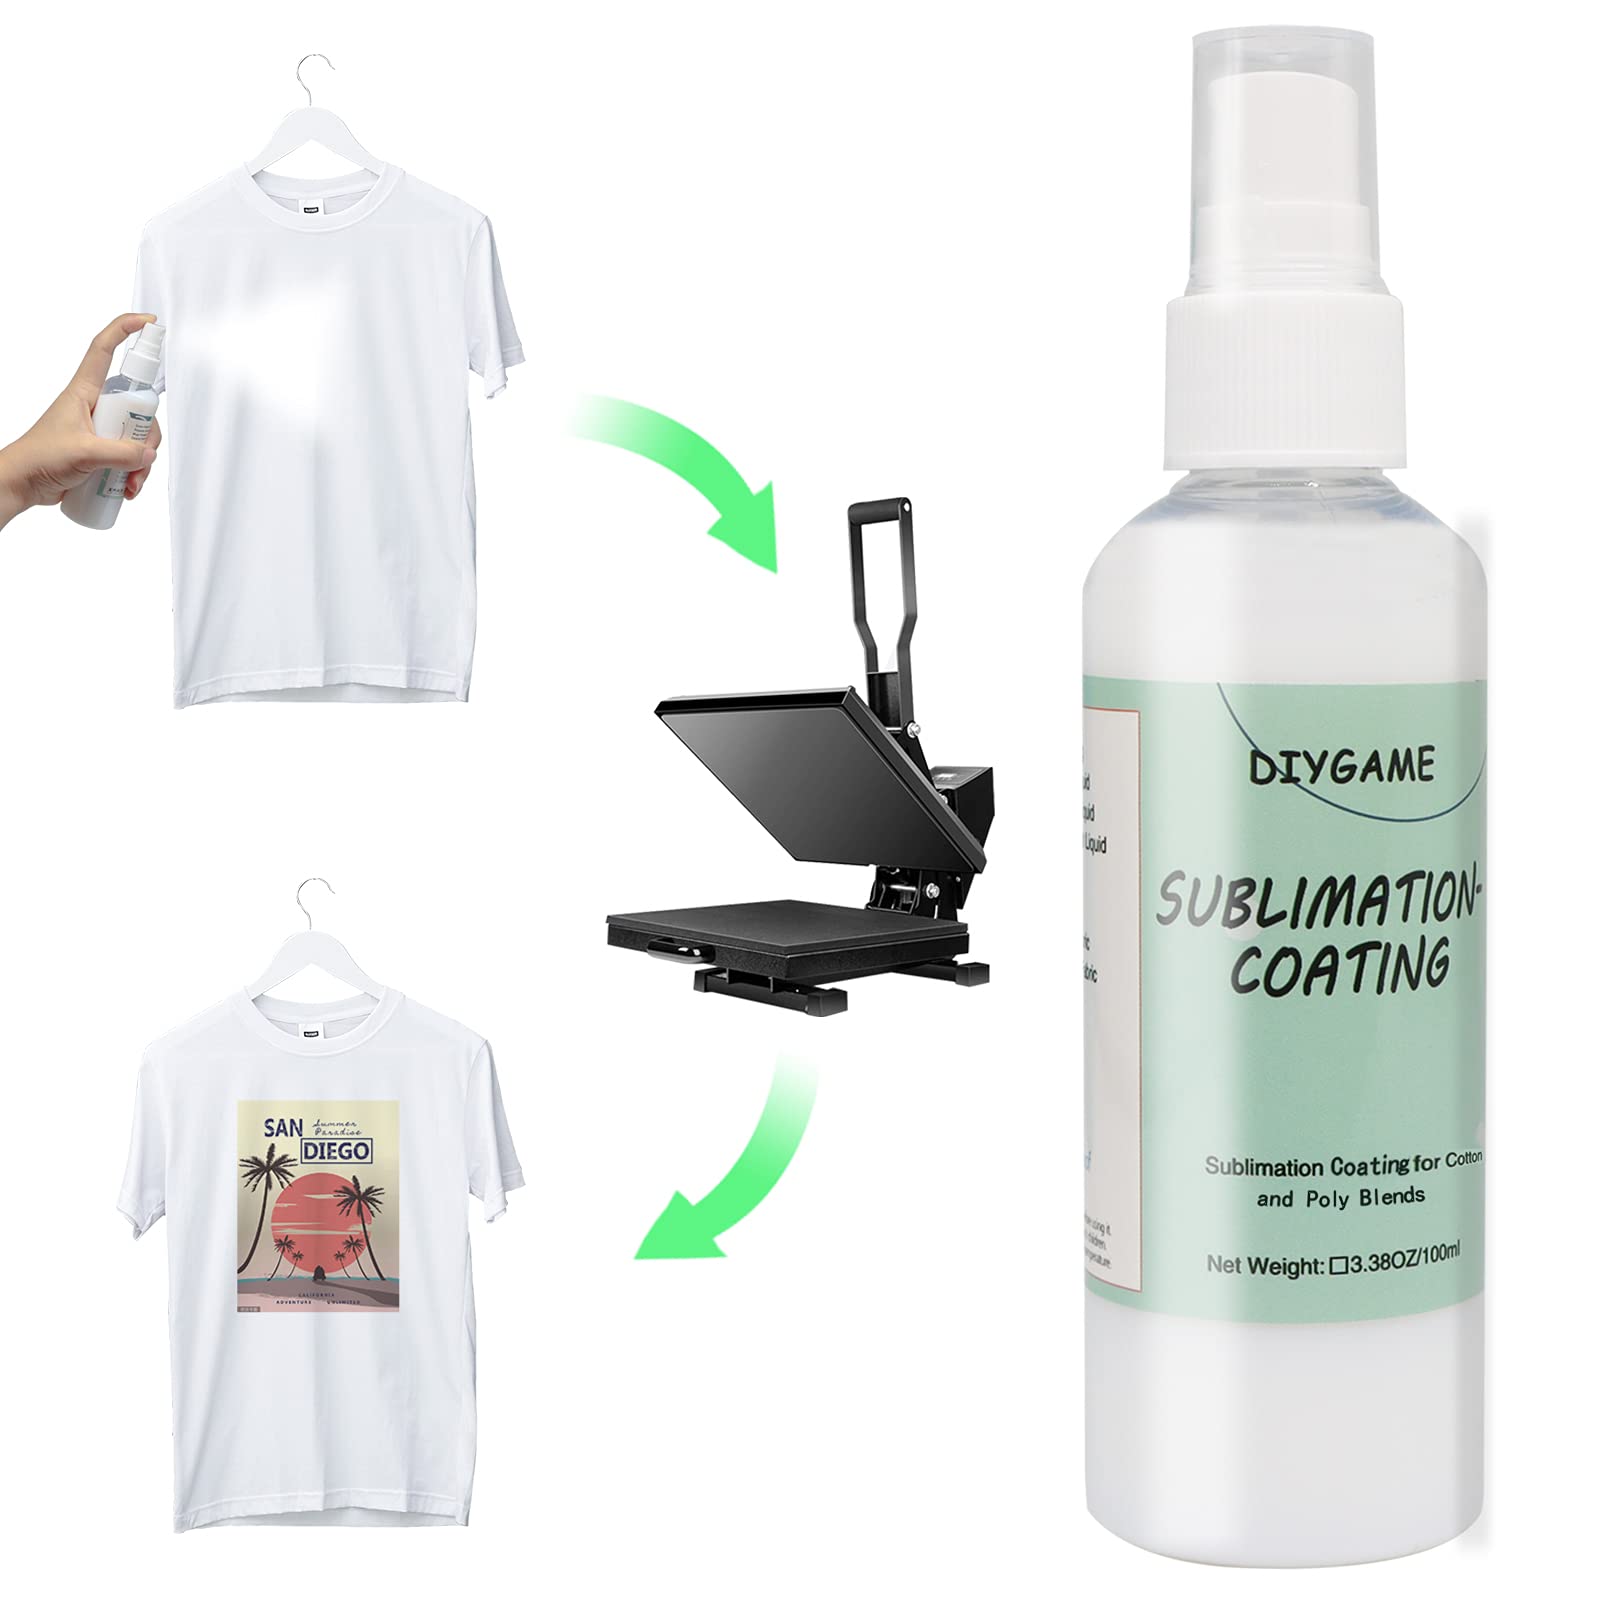 Sublimation Coating Spray for Cotton T-shirts, All Fabric